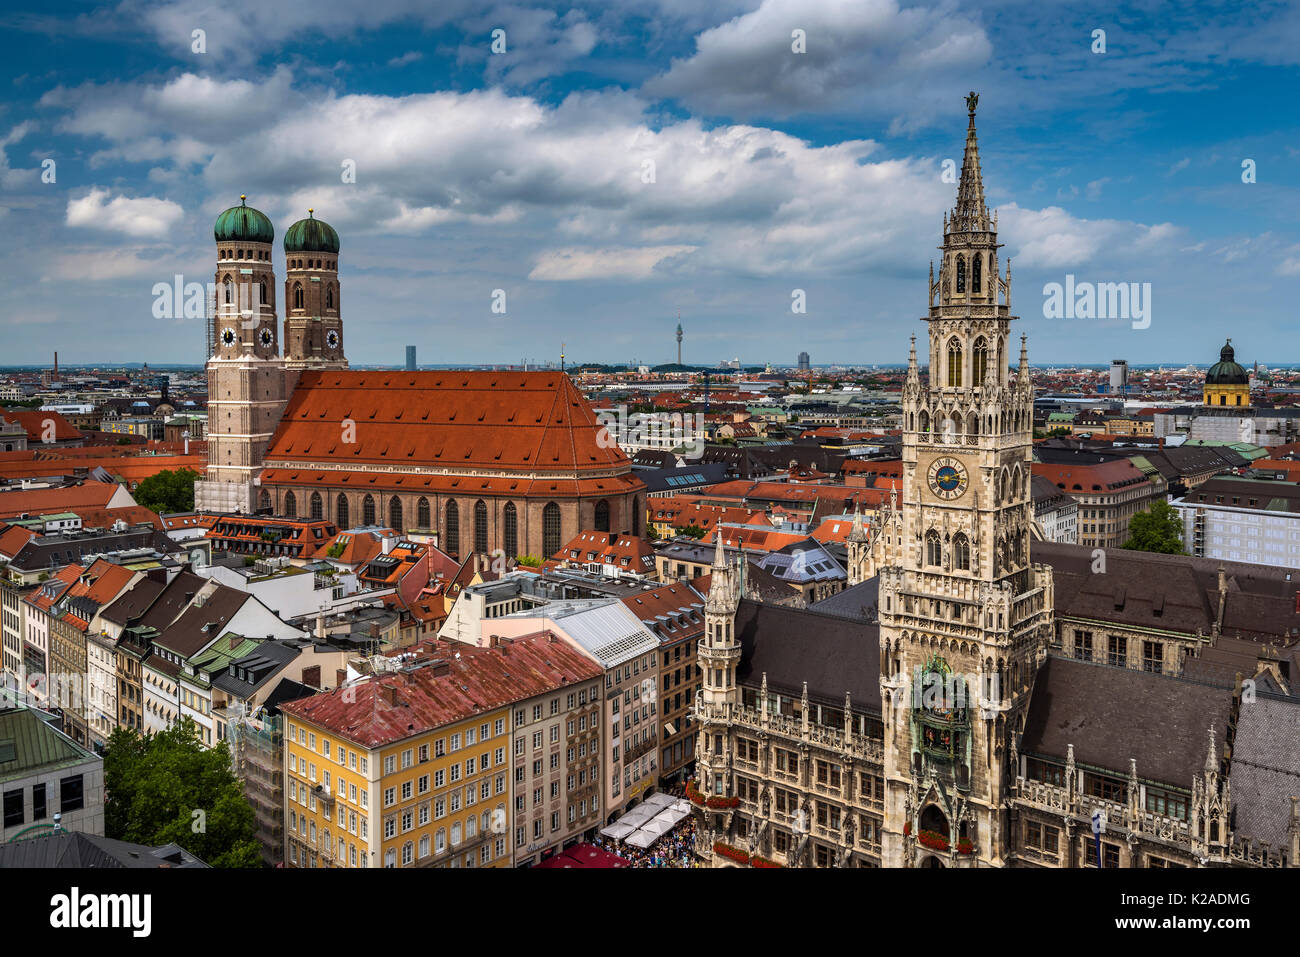 City skyline with Frauenkirche cathedral and new city hall or Neues Rathaus, Munich, Bavaria, Germany Stock Photo